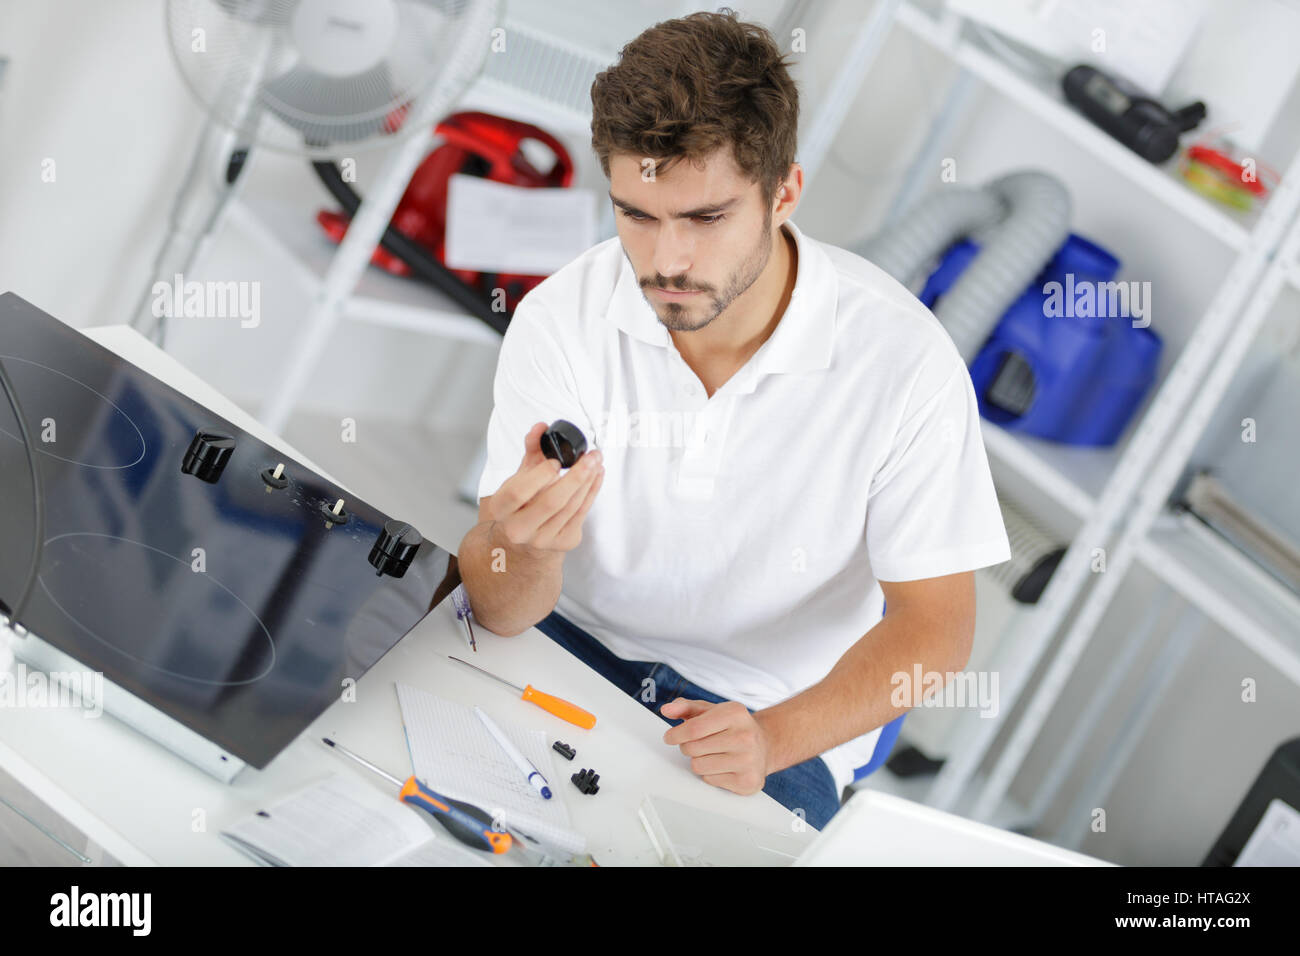 young repairman installing induction cooker in kitchen Stock Photo